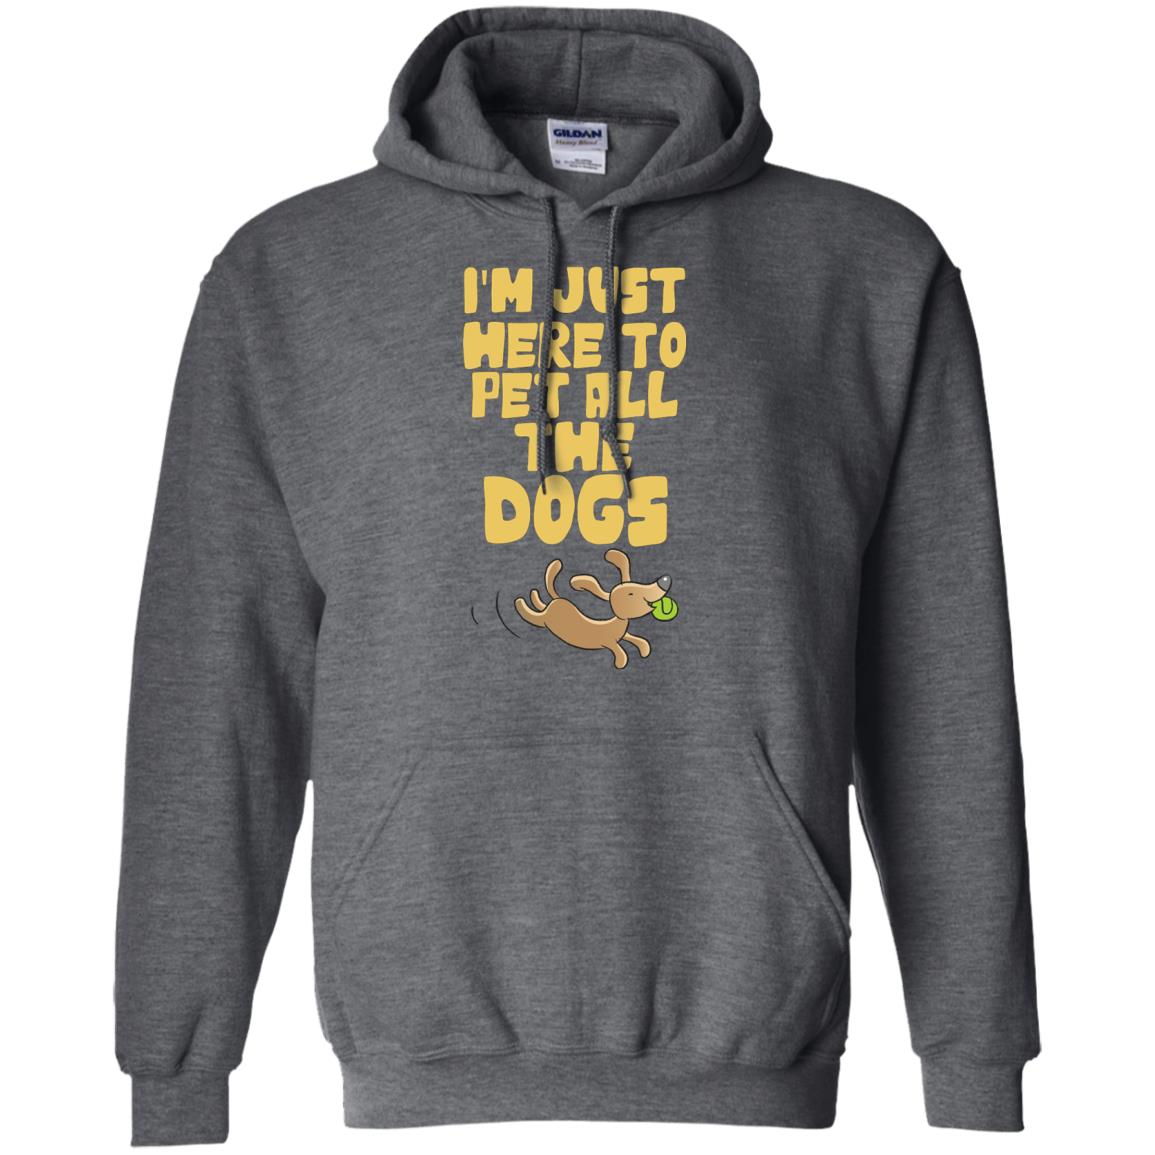 Pet All The Dogs Pullover Hoodie